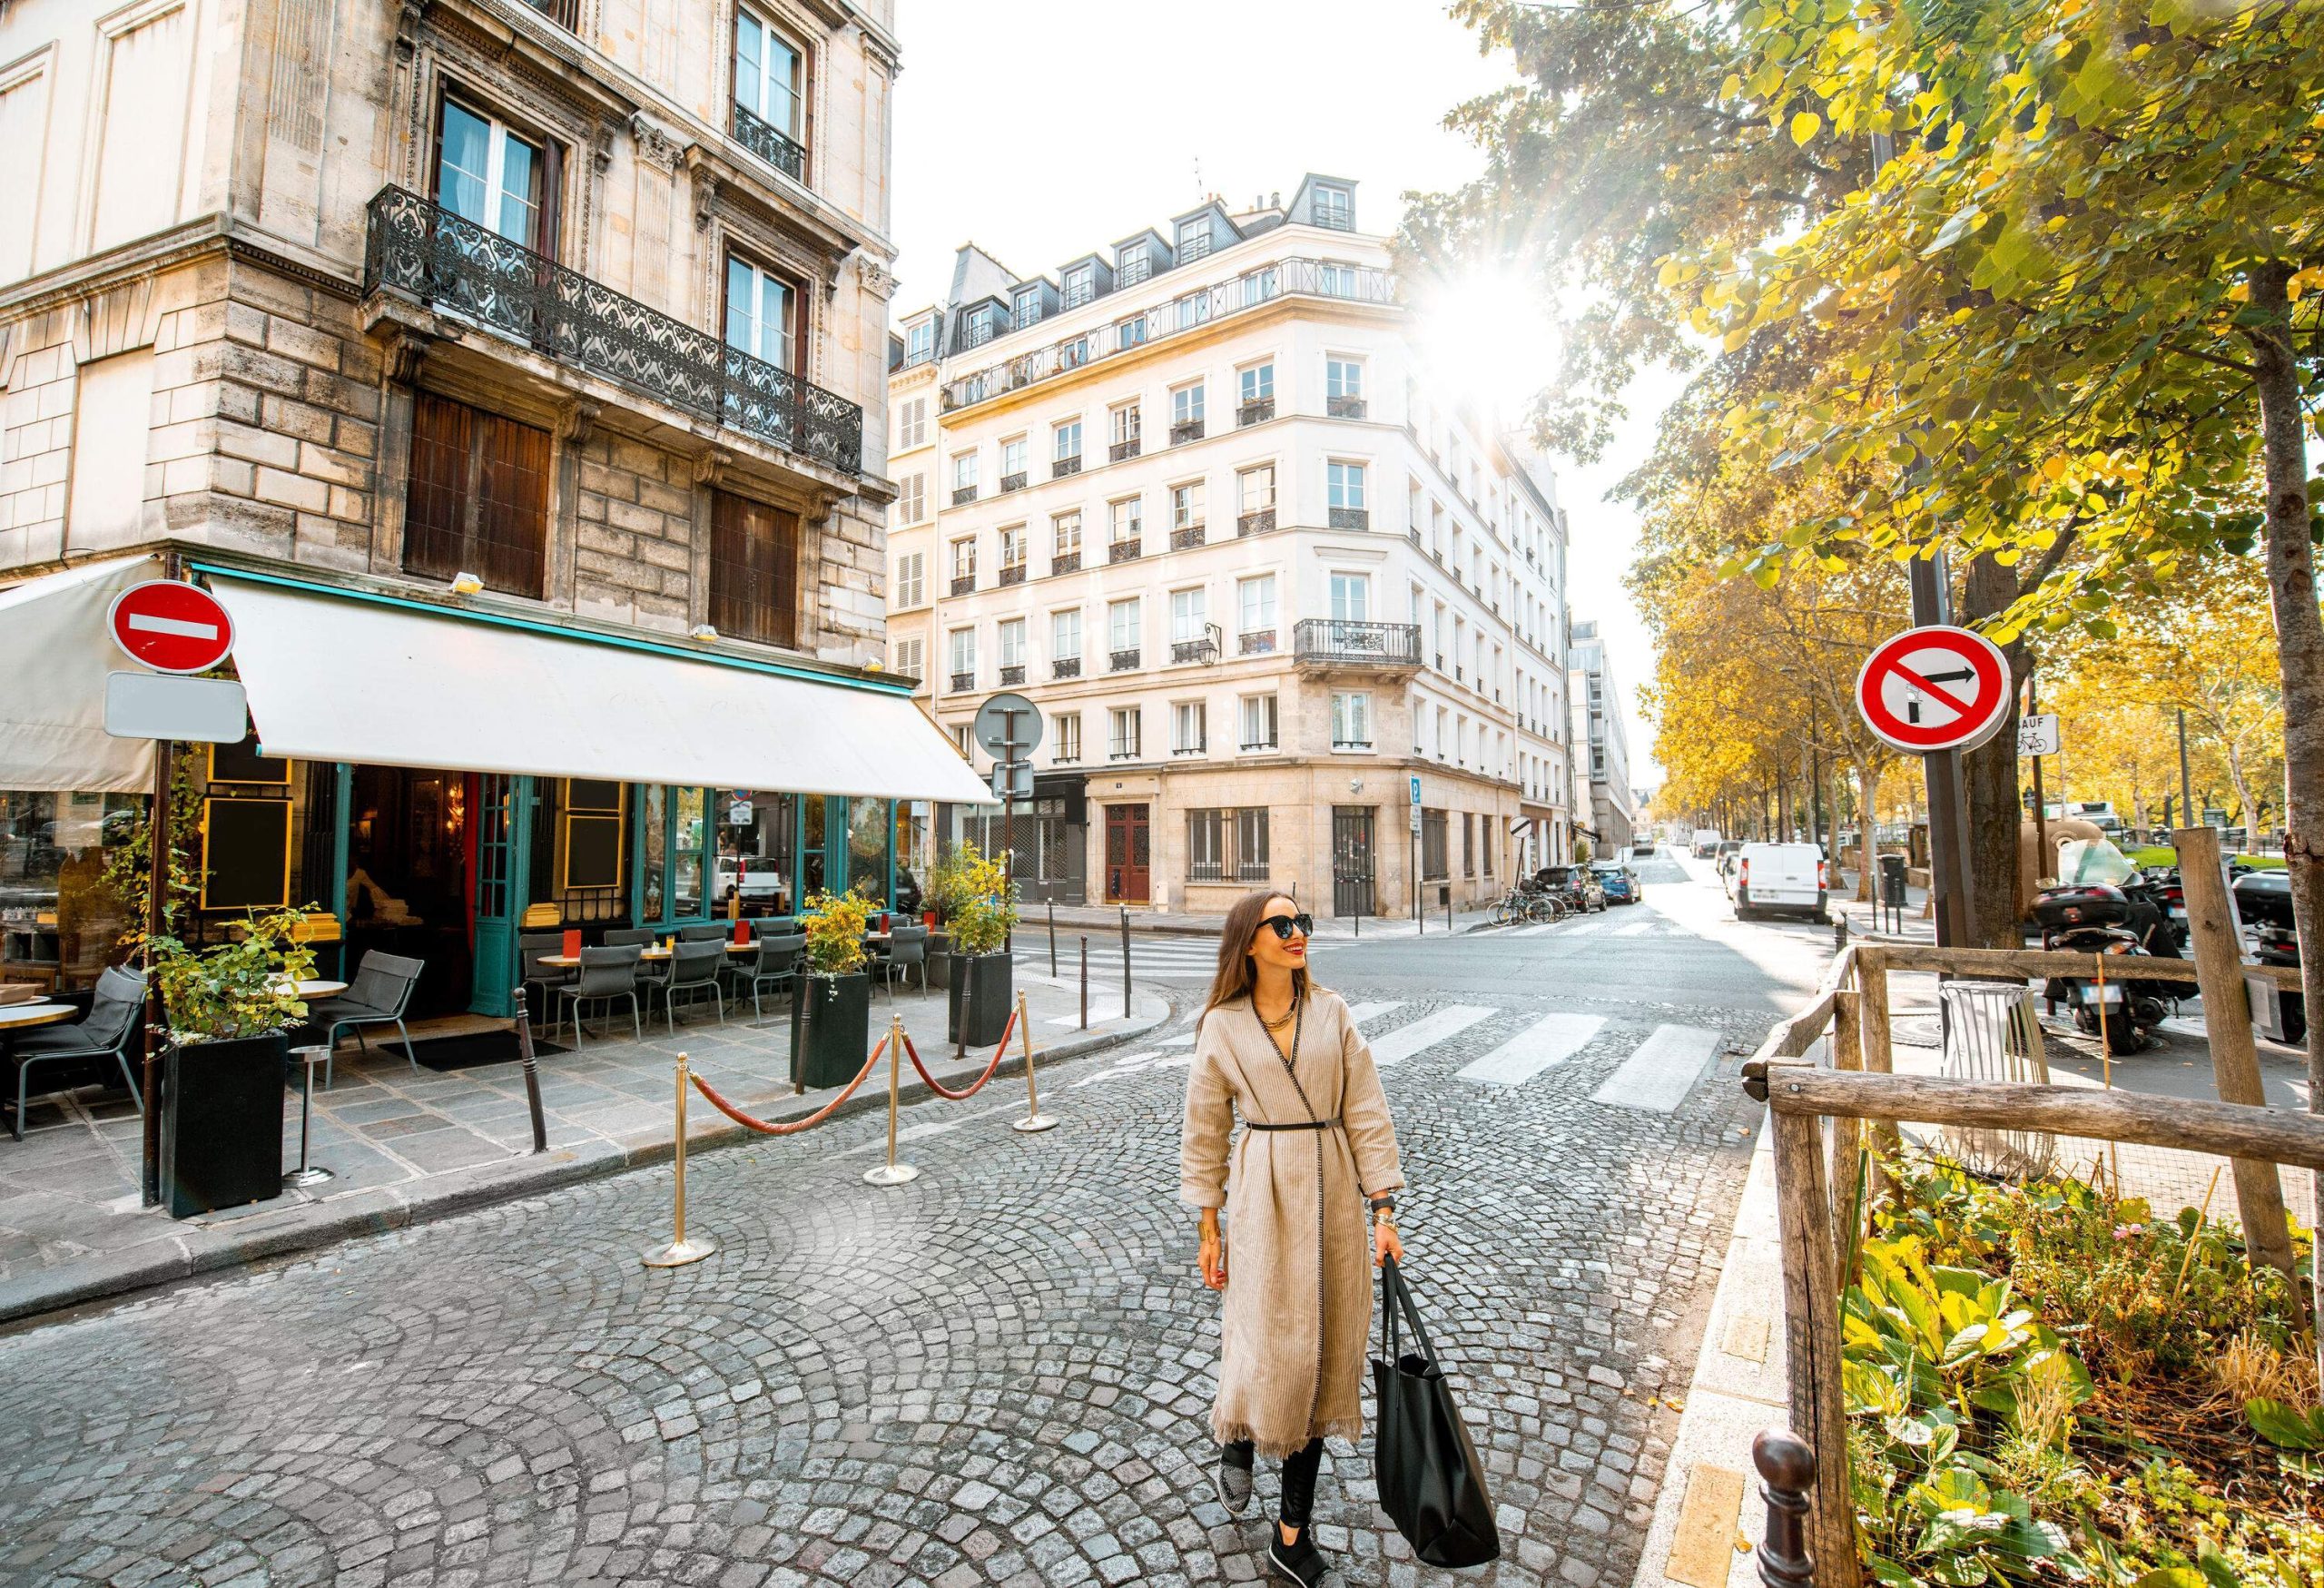 A stylish woman confidently crosses the street, with the charming facade of a restaurant building in the background, as a tree-lined street walk enhances the scene.